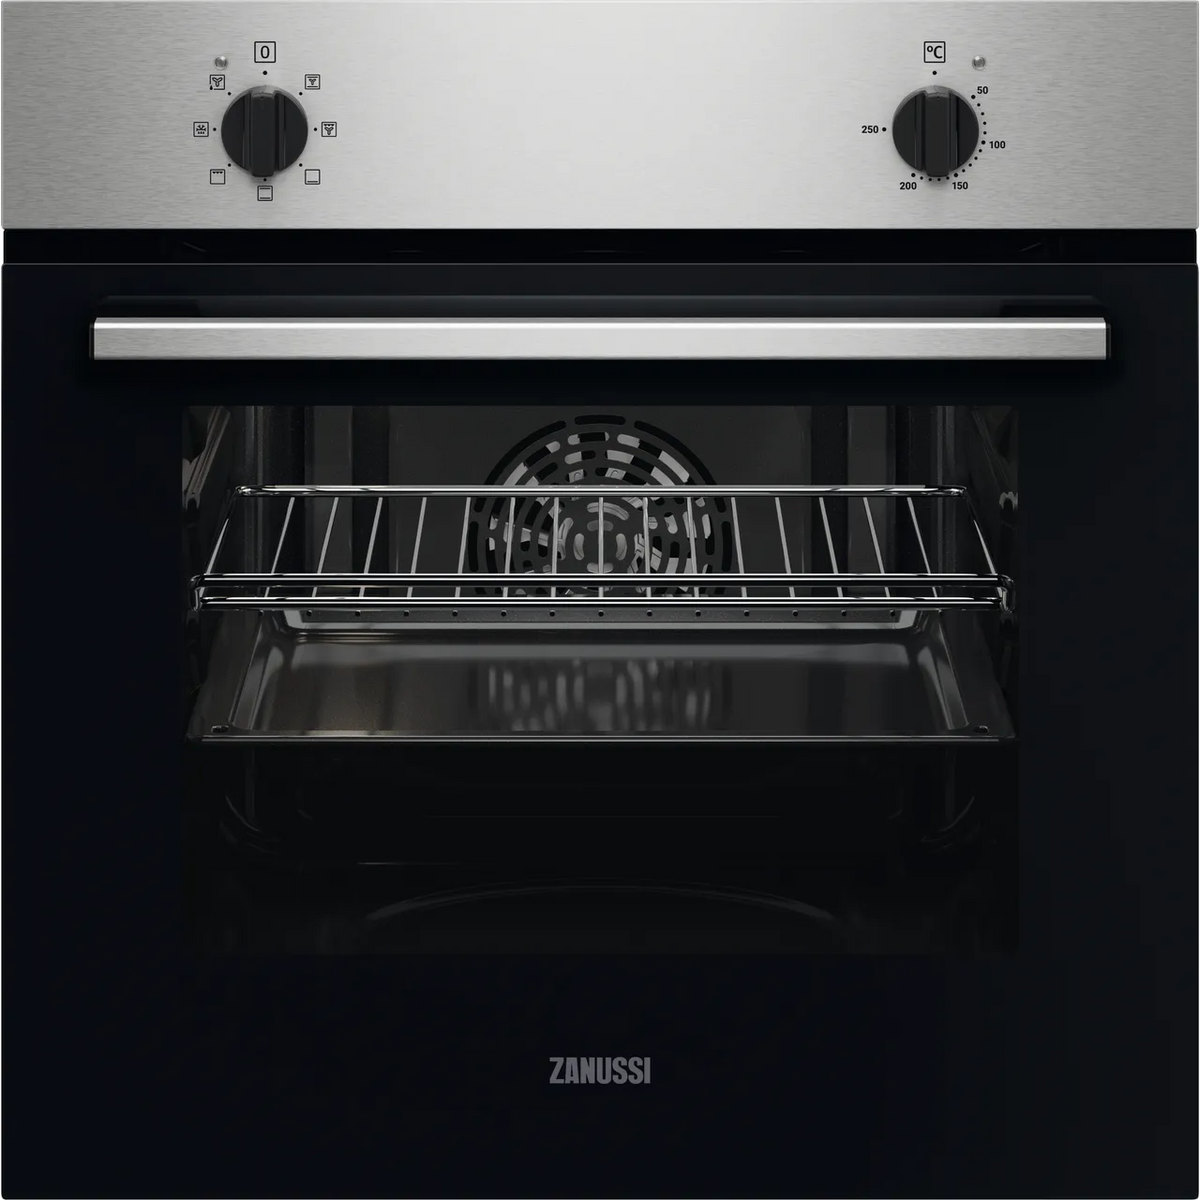 Zanussi 58L Built-In Electric Single Oven &amp; Ceramic Hob Package - Stainless Steel/Black | ZOHNC0X2 (7585366081724)